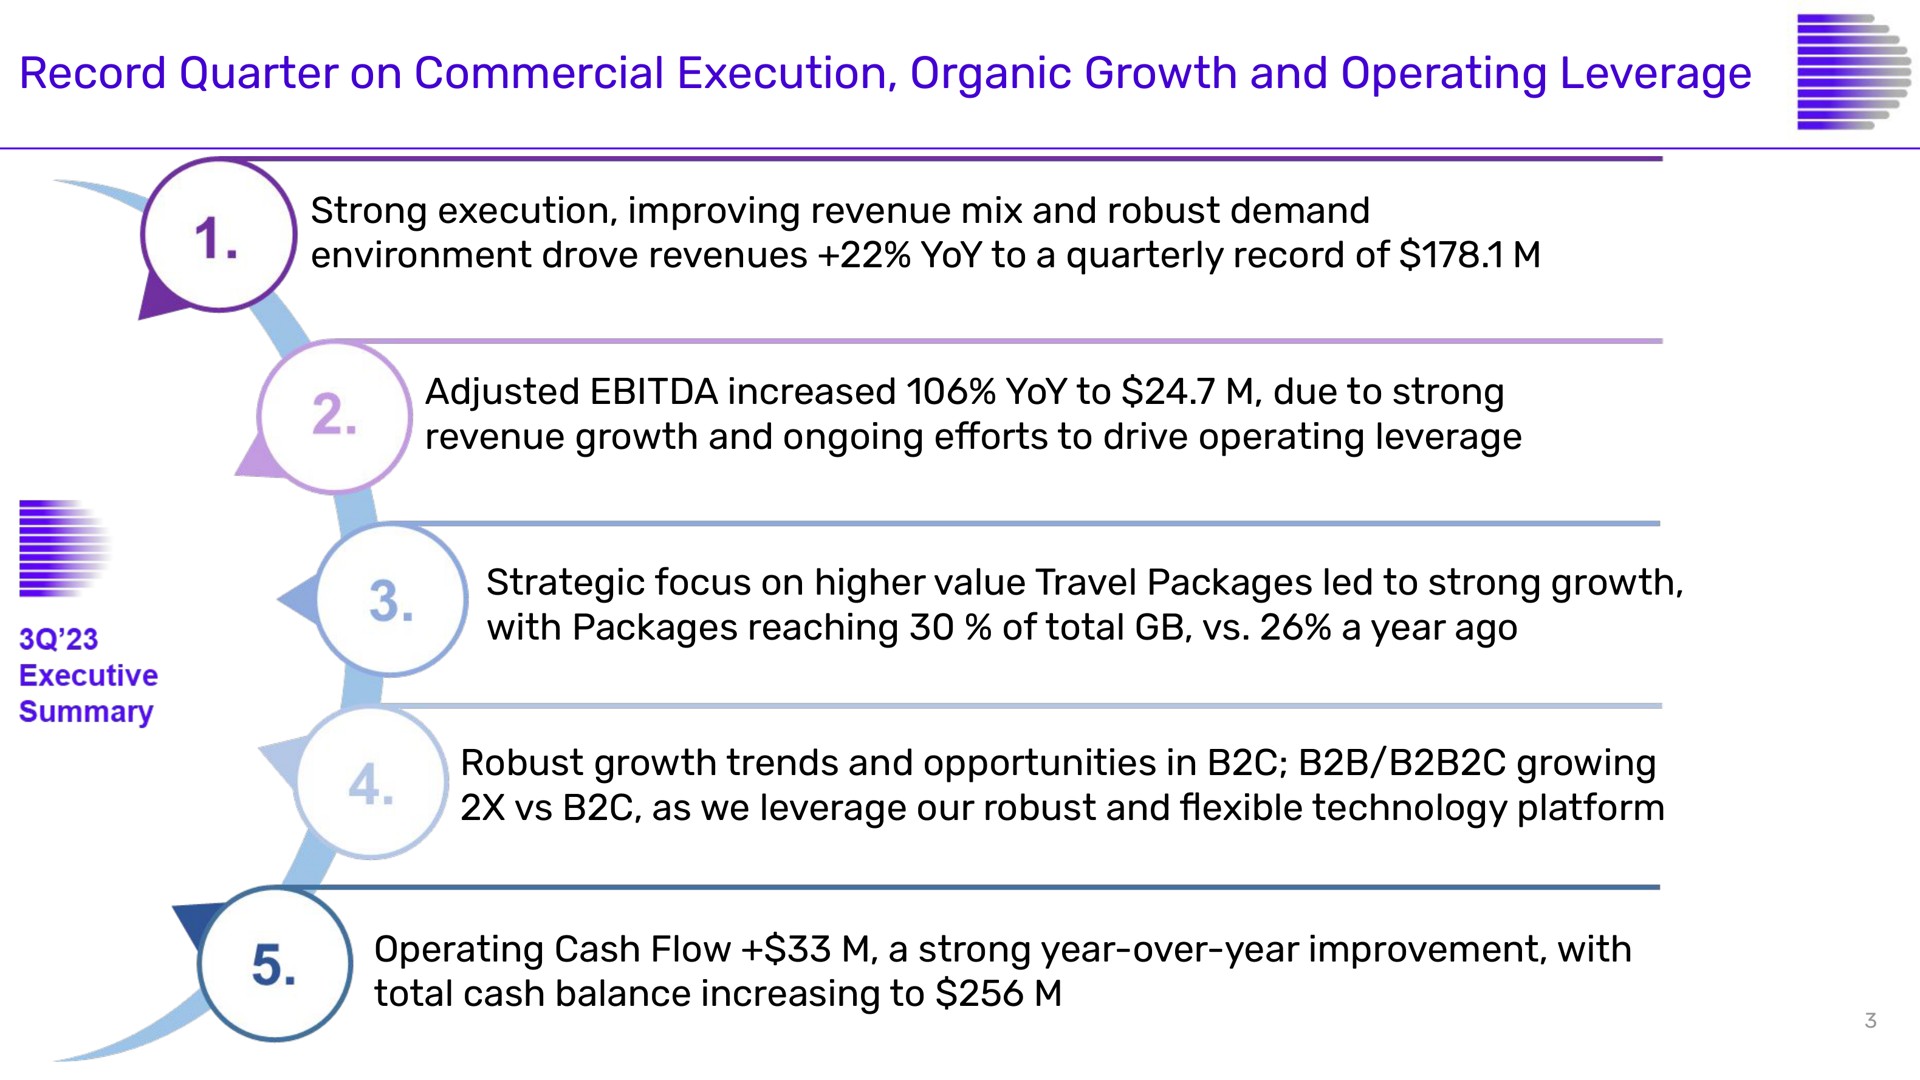 record quarter on commercial execution organic growth and operating leverage | Despegar